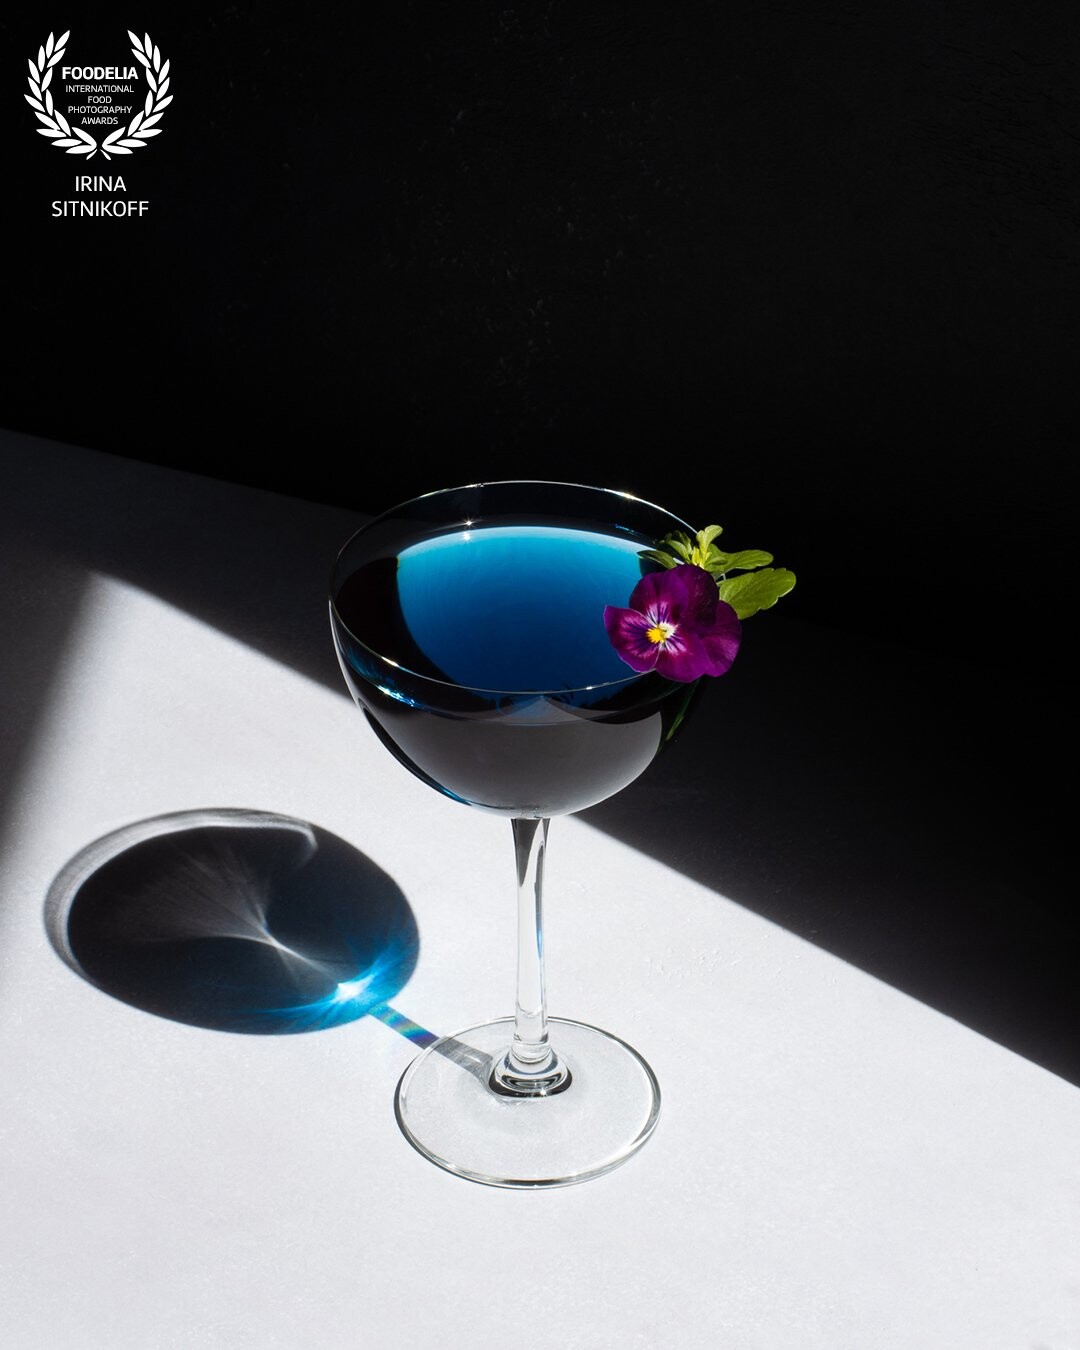 I love working with hard light and so glad I managed to catch a sunny day to take this photo. Inside the glass is Butterfly Pea Flower drink, the deep blue drink color created an amazing shadow. I decorated the glass with a delicate fresh pansy which complements the blue color so well. The beauty is in simplicity.